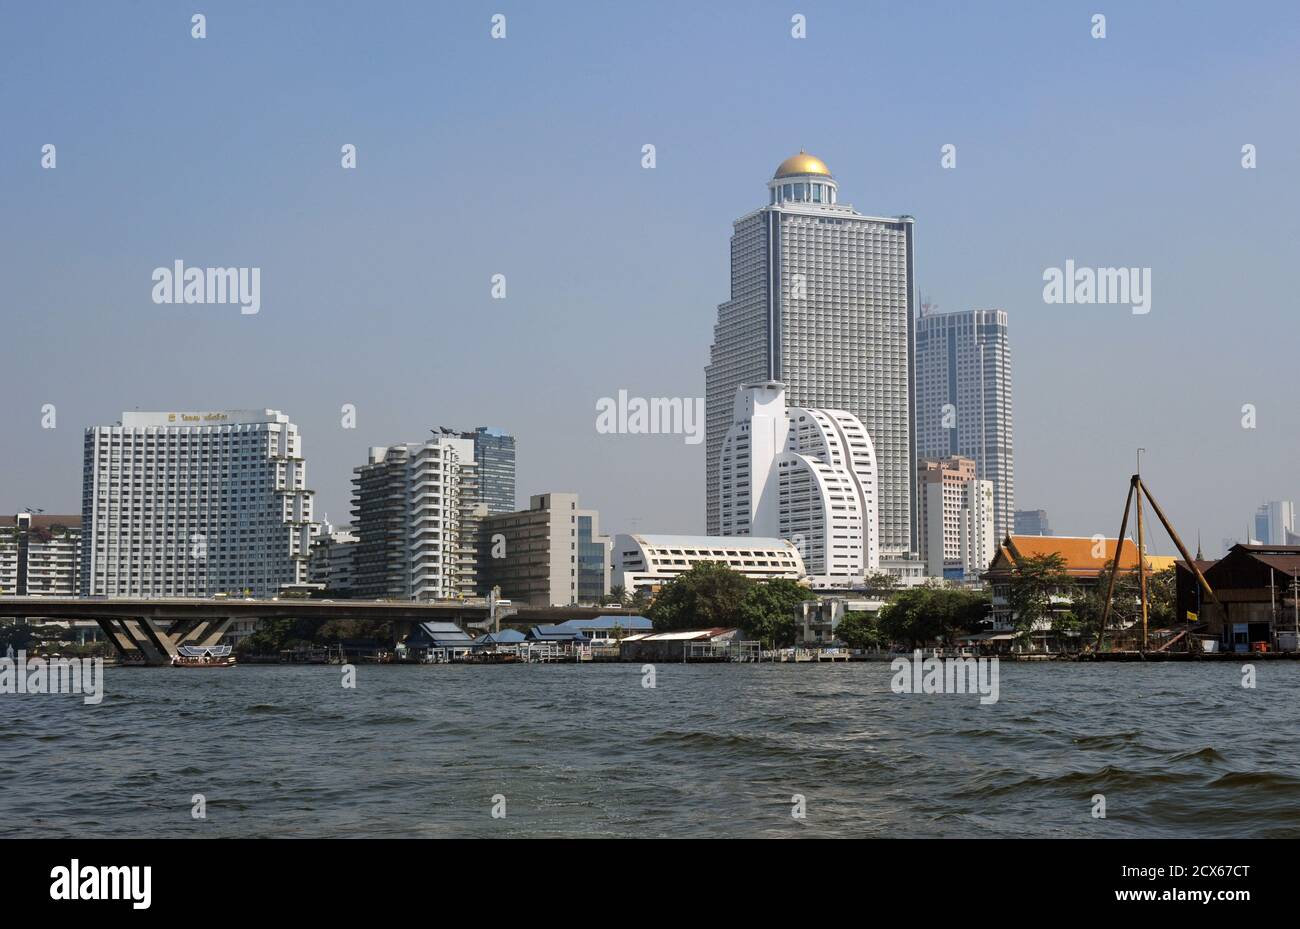 The Chao Phraya River, Bangkok. High rise development including the dome-topped State Tower, the second tallest building in Thailand. The rooftop Sirocco restaurant and 'Sky Bar', on the 63rd floor.  Thailand Stock Photo